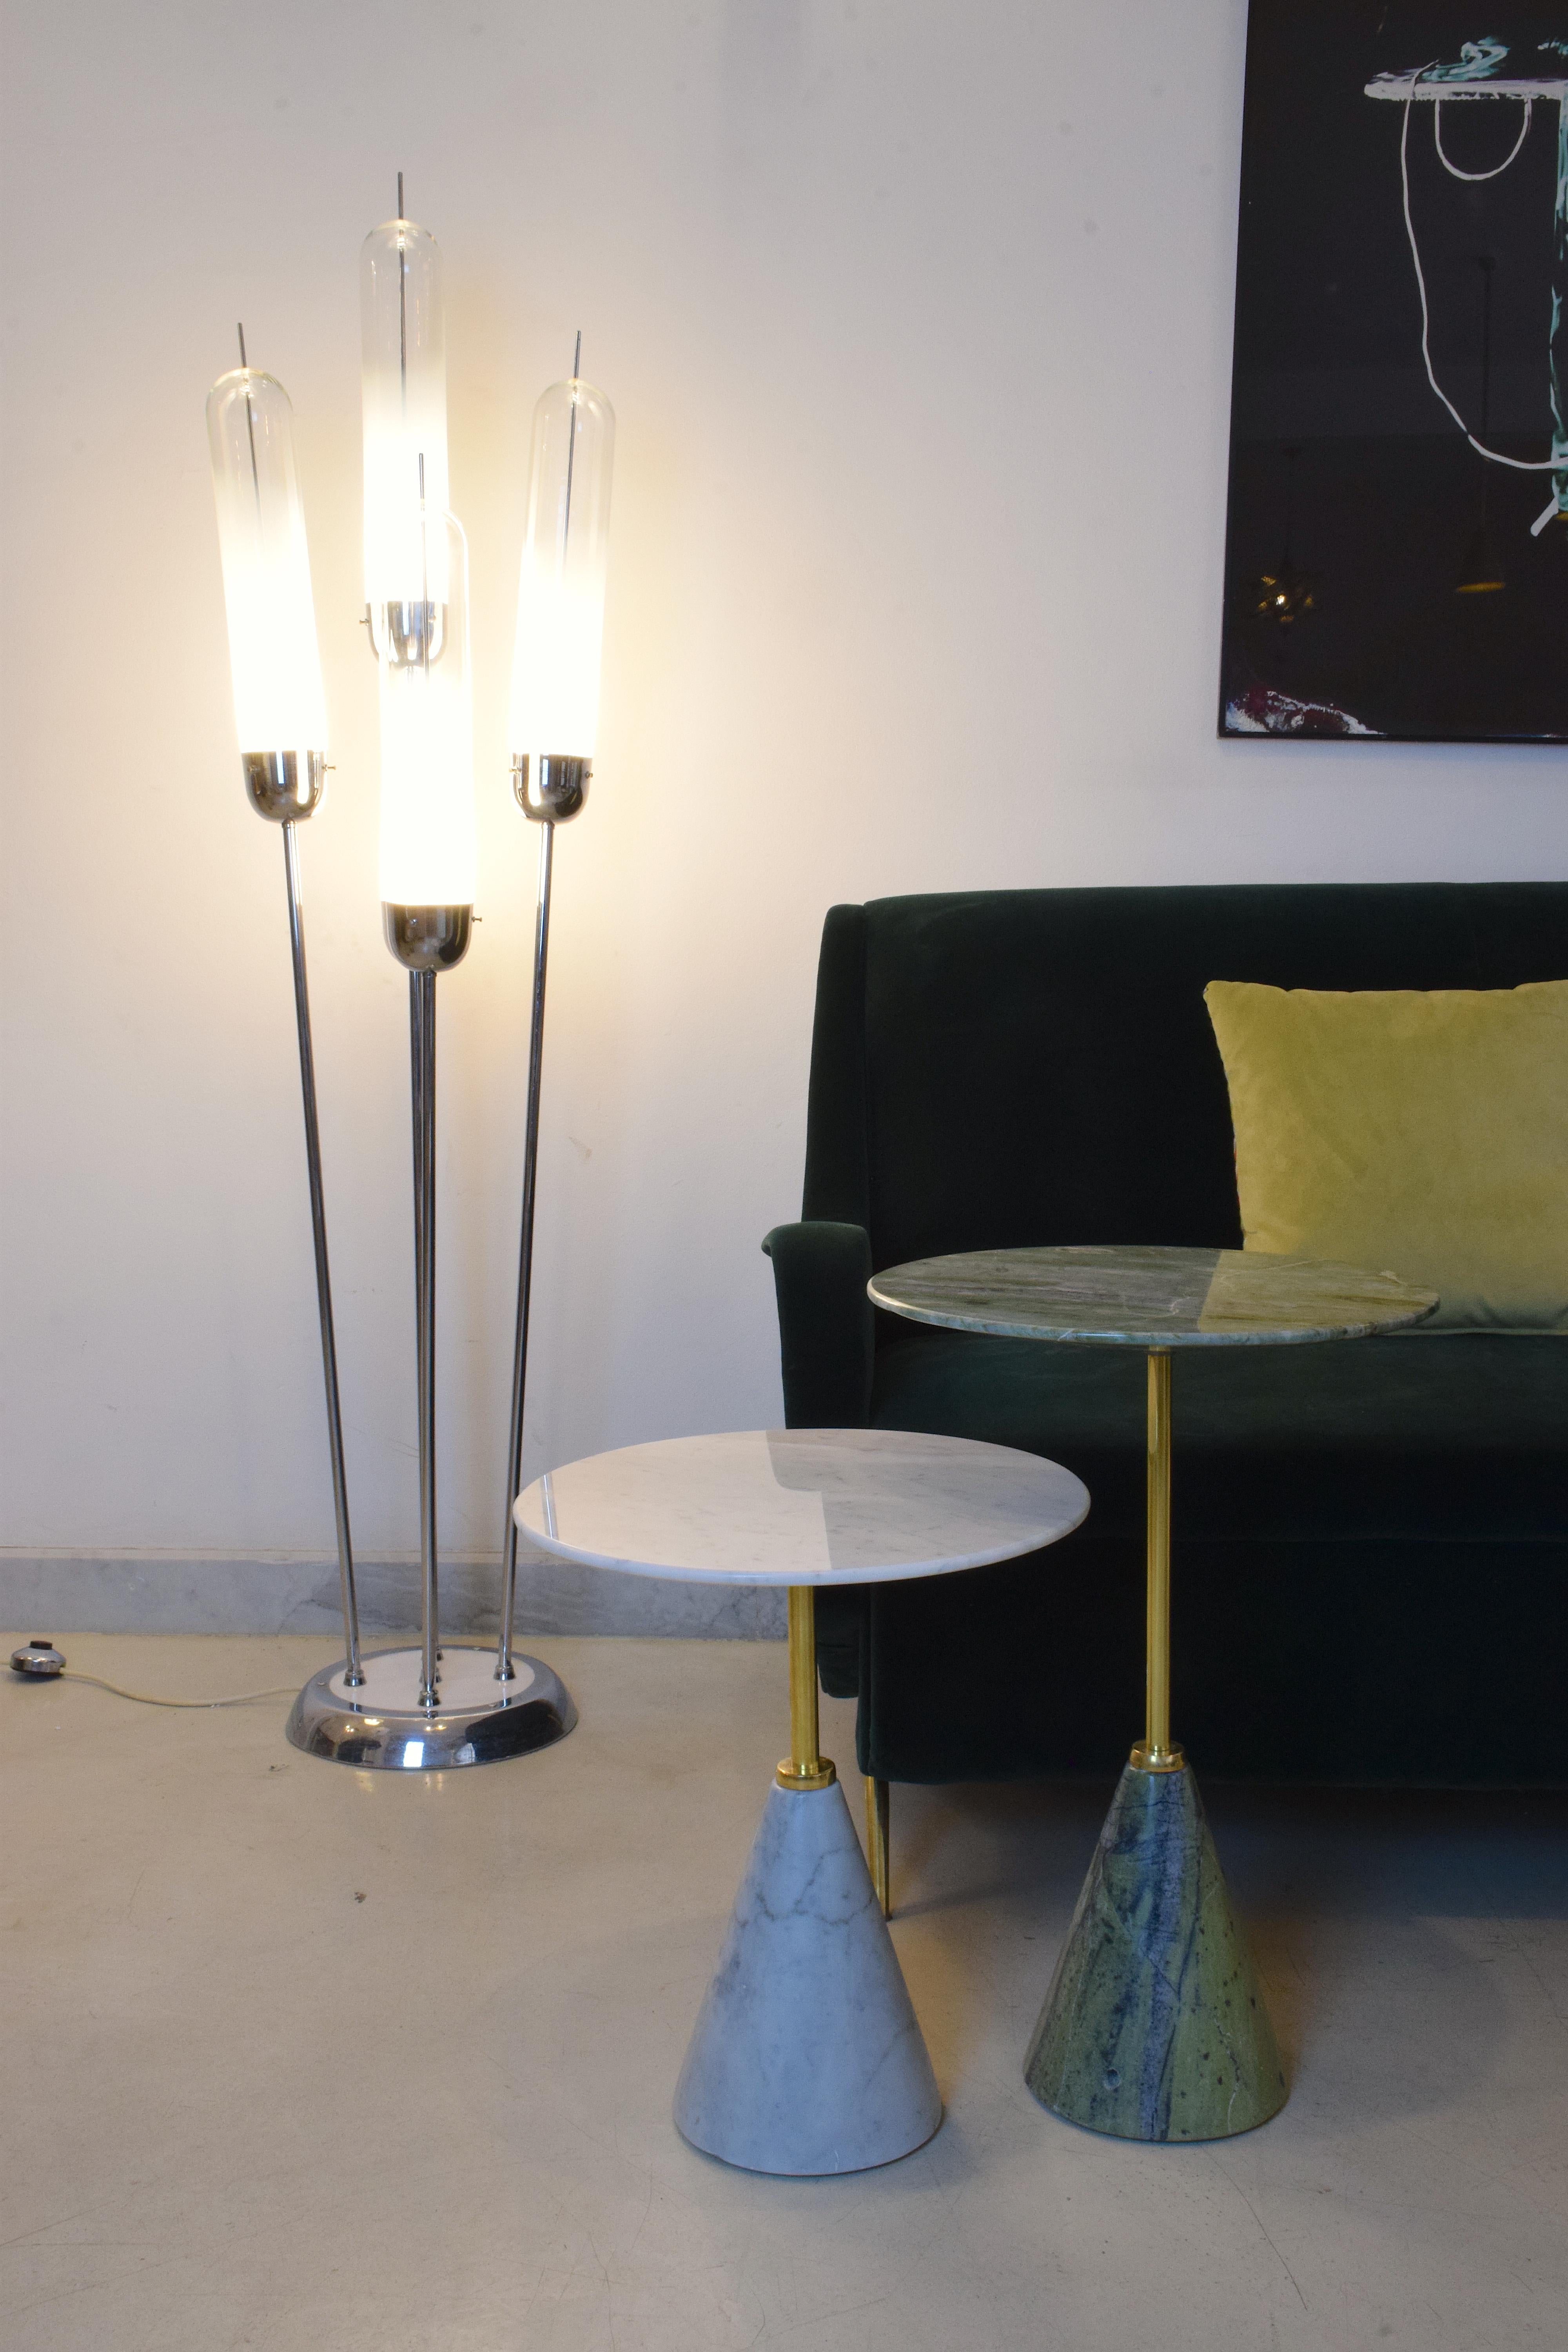 A 20th century Italian floor lamp designed by Carlo Nason for Mazzega circa 1970s and composed of five striking white Murano blown glass shades standing on stainless steel tubes.
Italy, circa 1970s.

Wiring is professionally checked.
E27 and E26